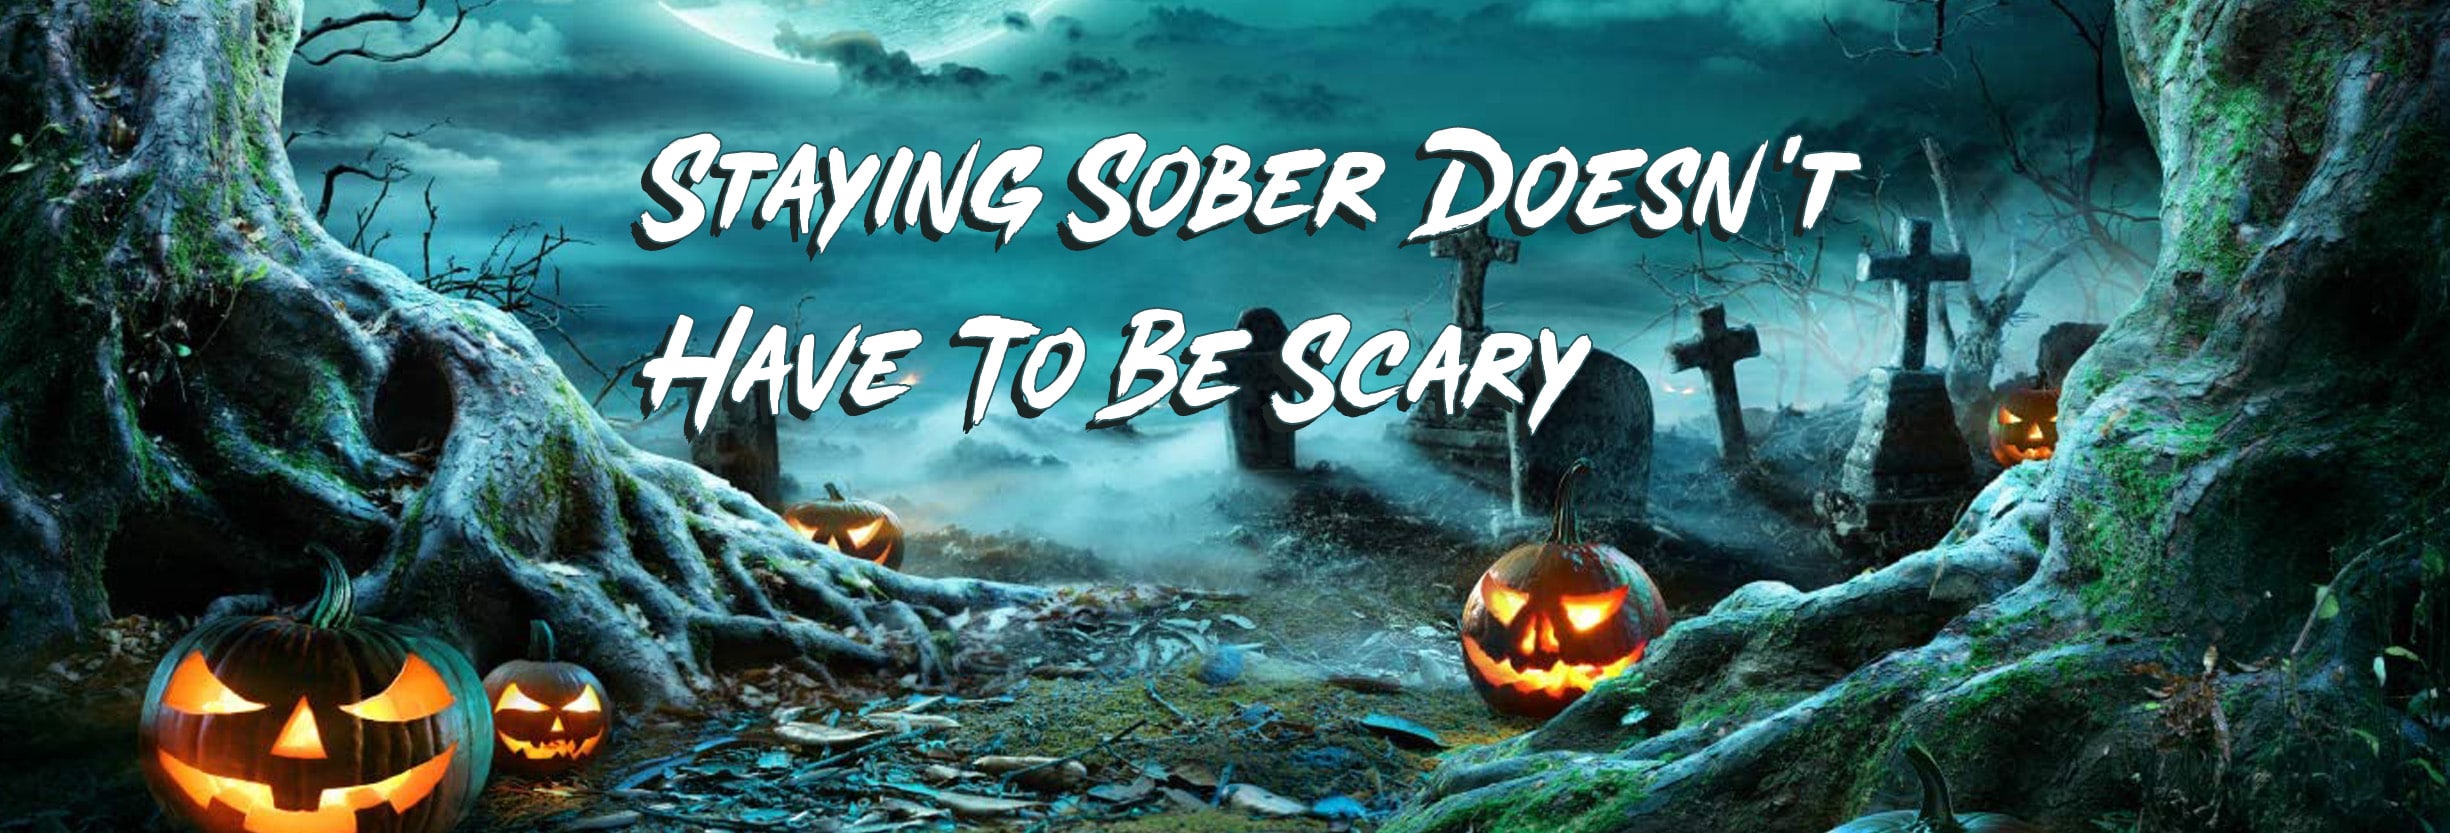 Staying Sober Doesn’t Have To Be Scary